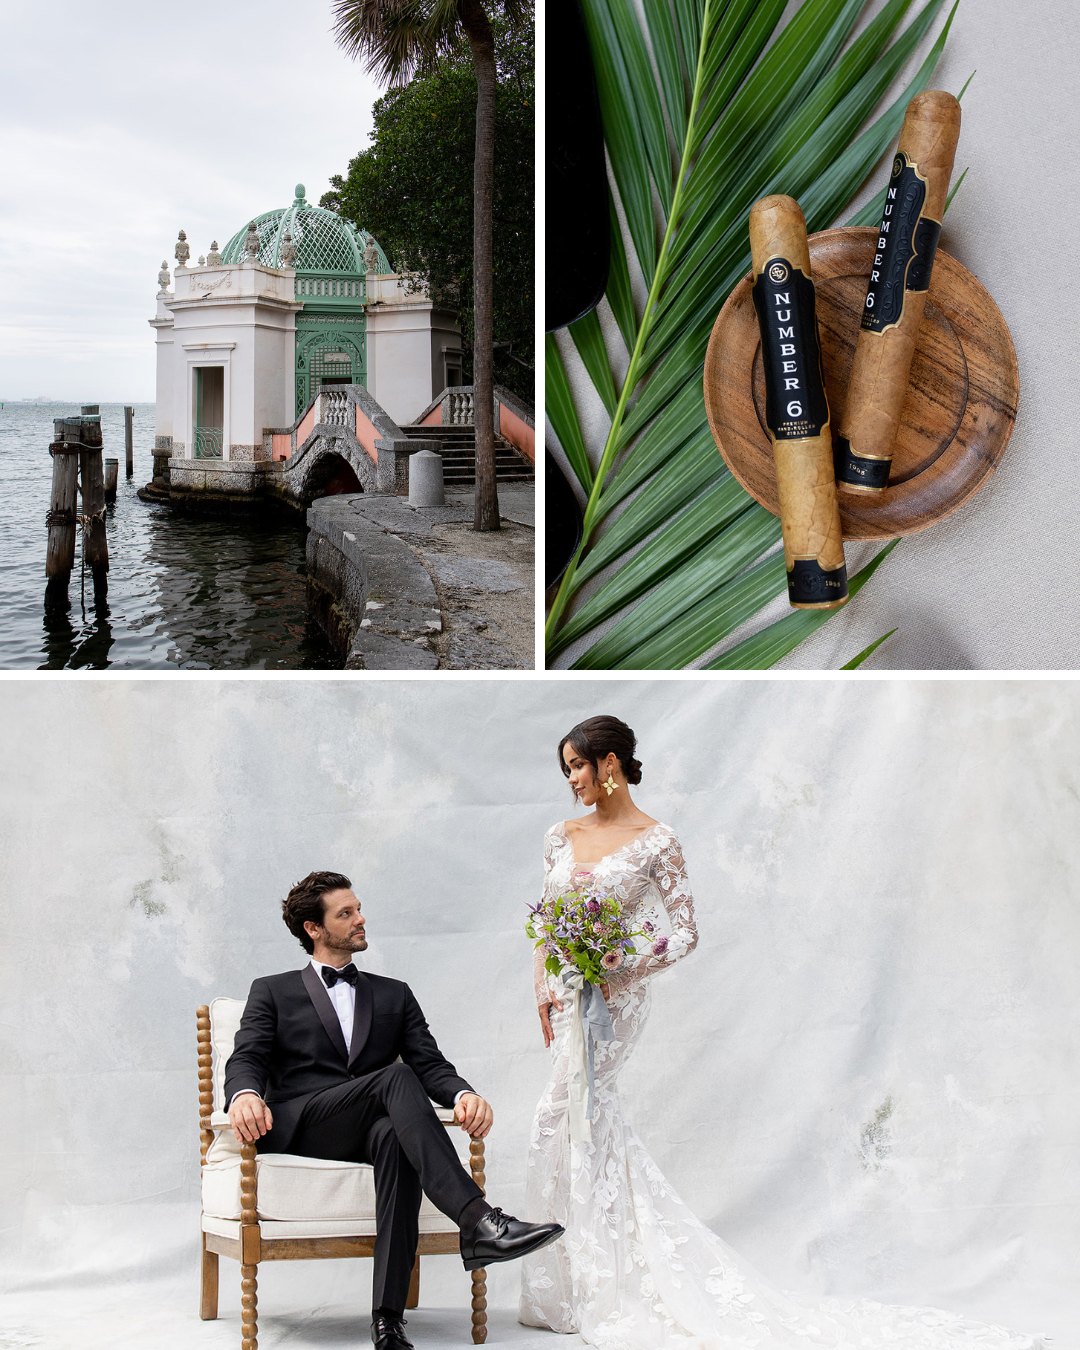 old dome structure right on the water, two Number 6 brand cigars with a palm leaf, groom sits in chair looking up at bride who holds a bouquet of purple flowers